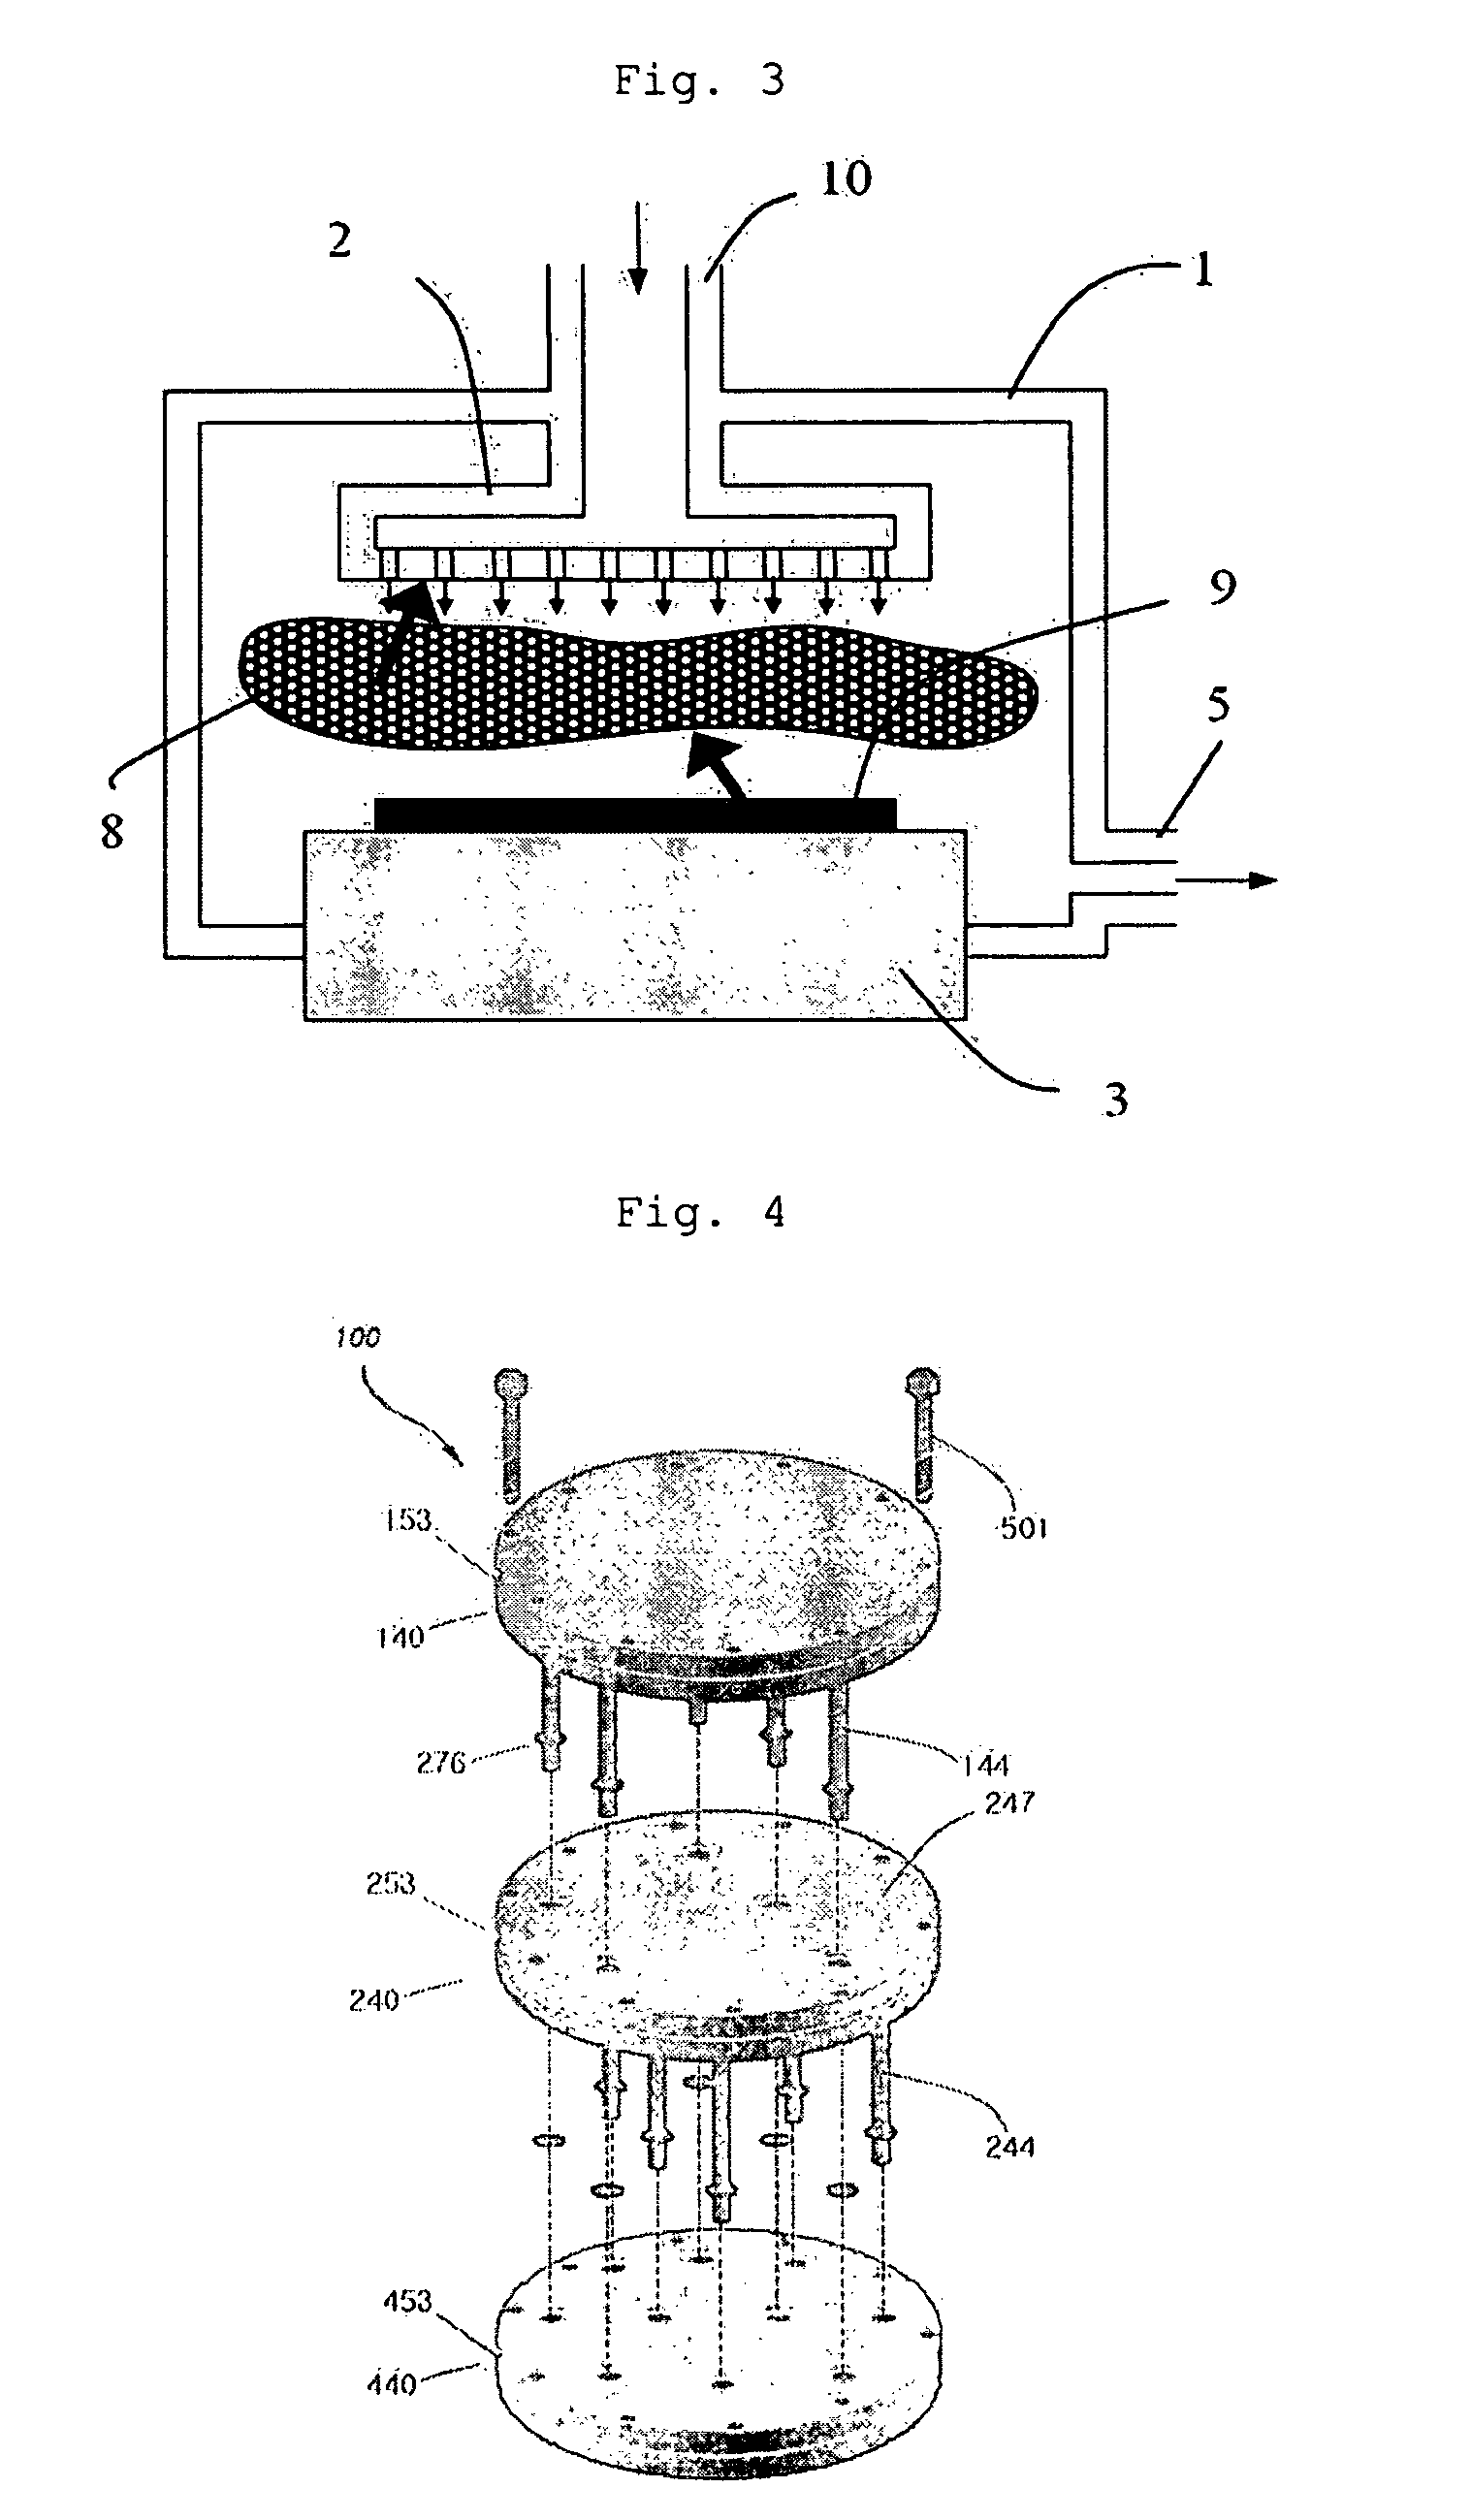 Method for chemical vapor deposition (CVD) with showerhead and method thereof